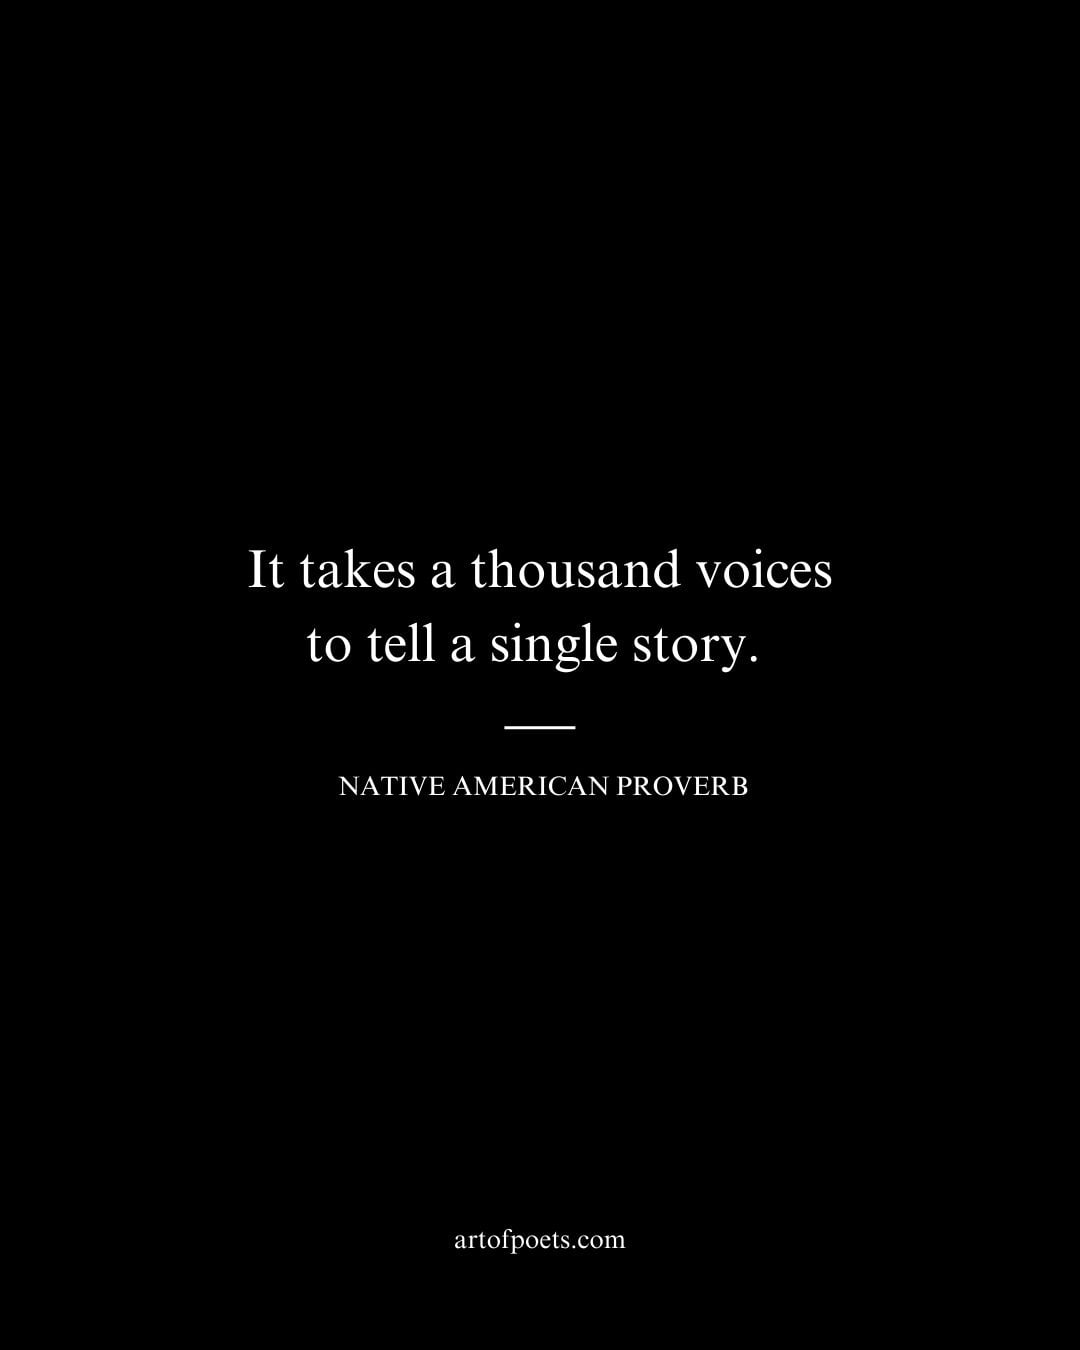 It takes a thousand voices to tell a single story